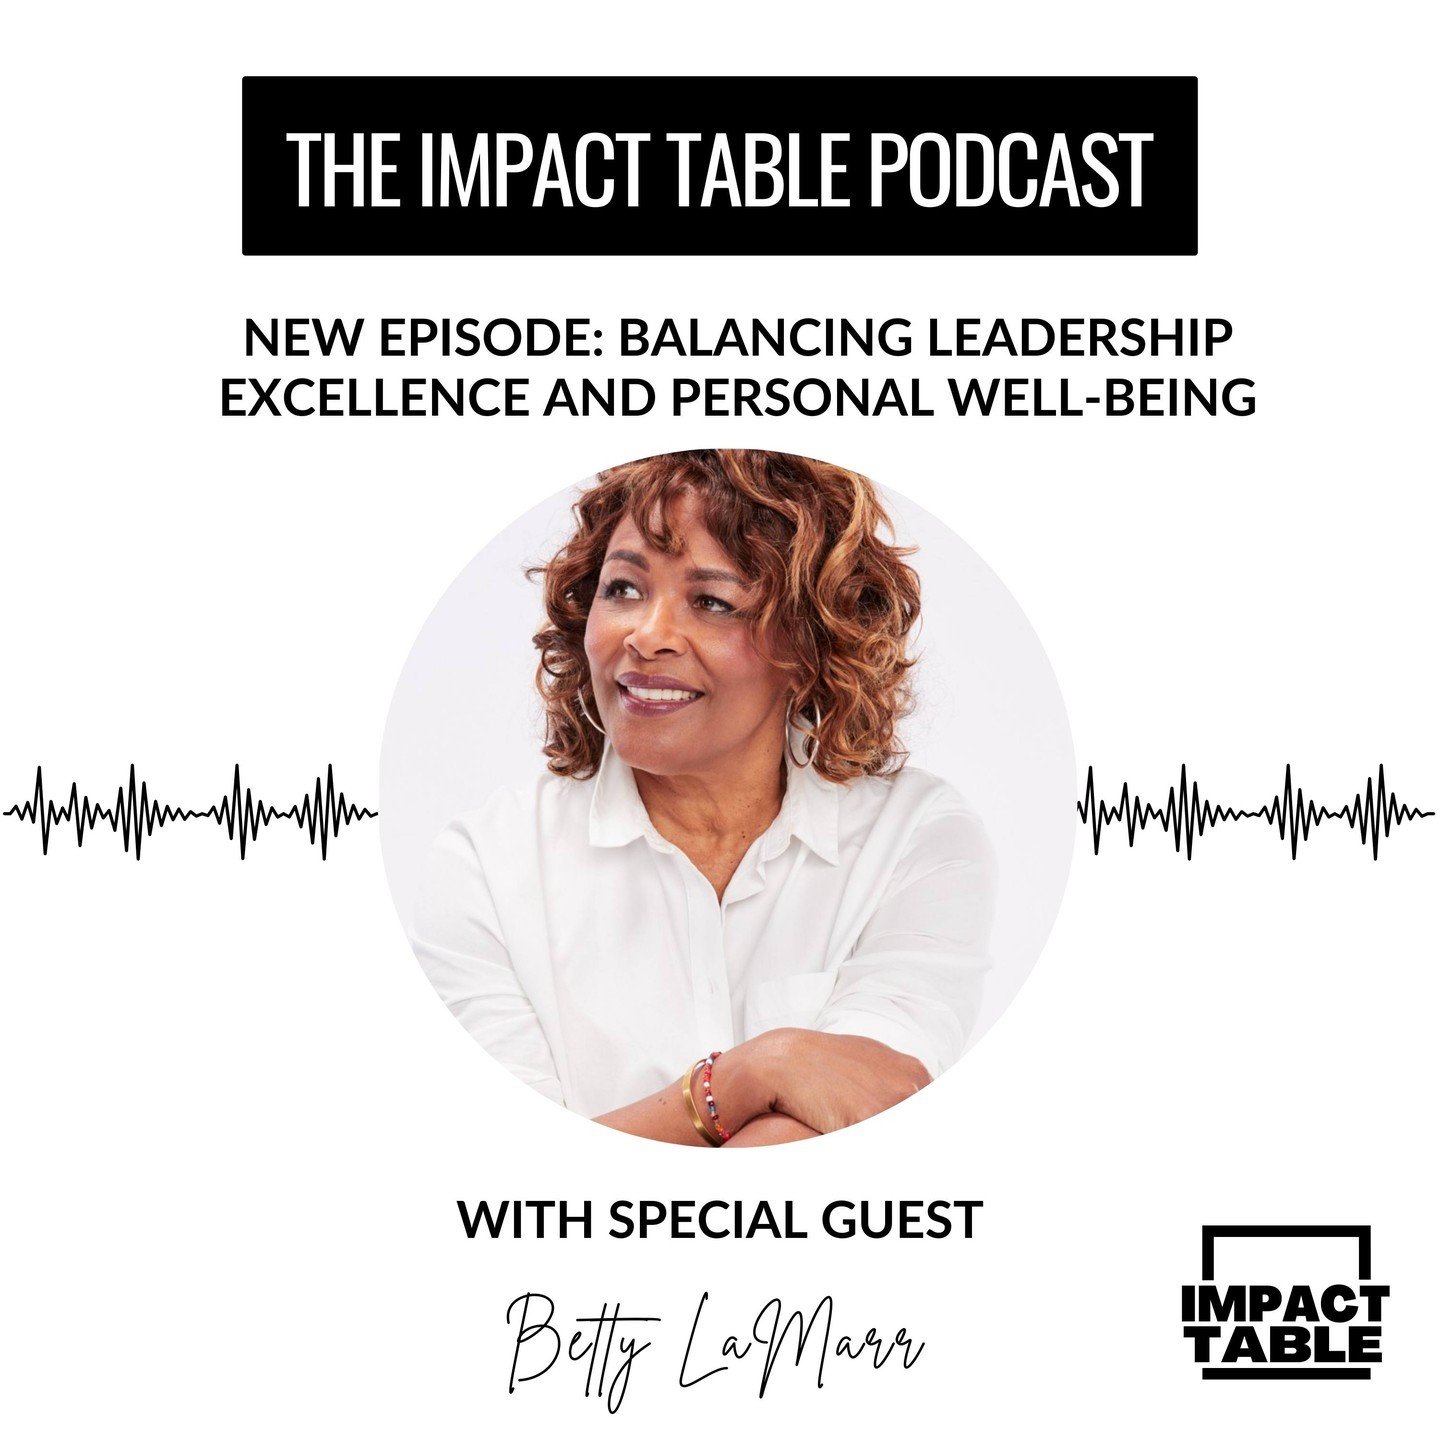 This week on the Impact Table Podcast, host Marssie Versola is joined by the incredible Betty LaMarr, Founder and former CEO of EmpowHer Institute. 

In this conversation, Betty shares about her journey as a social impact leader and brings powerful l